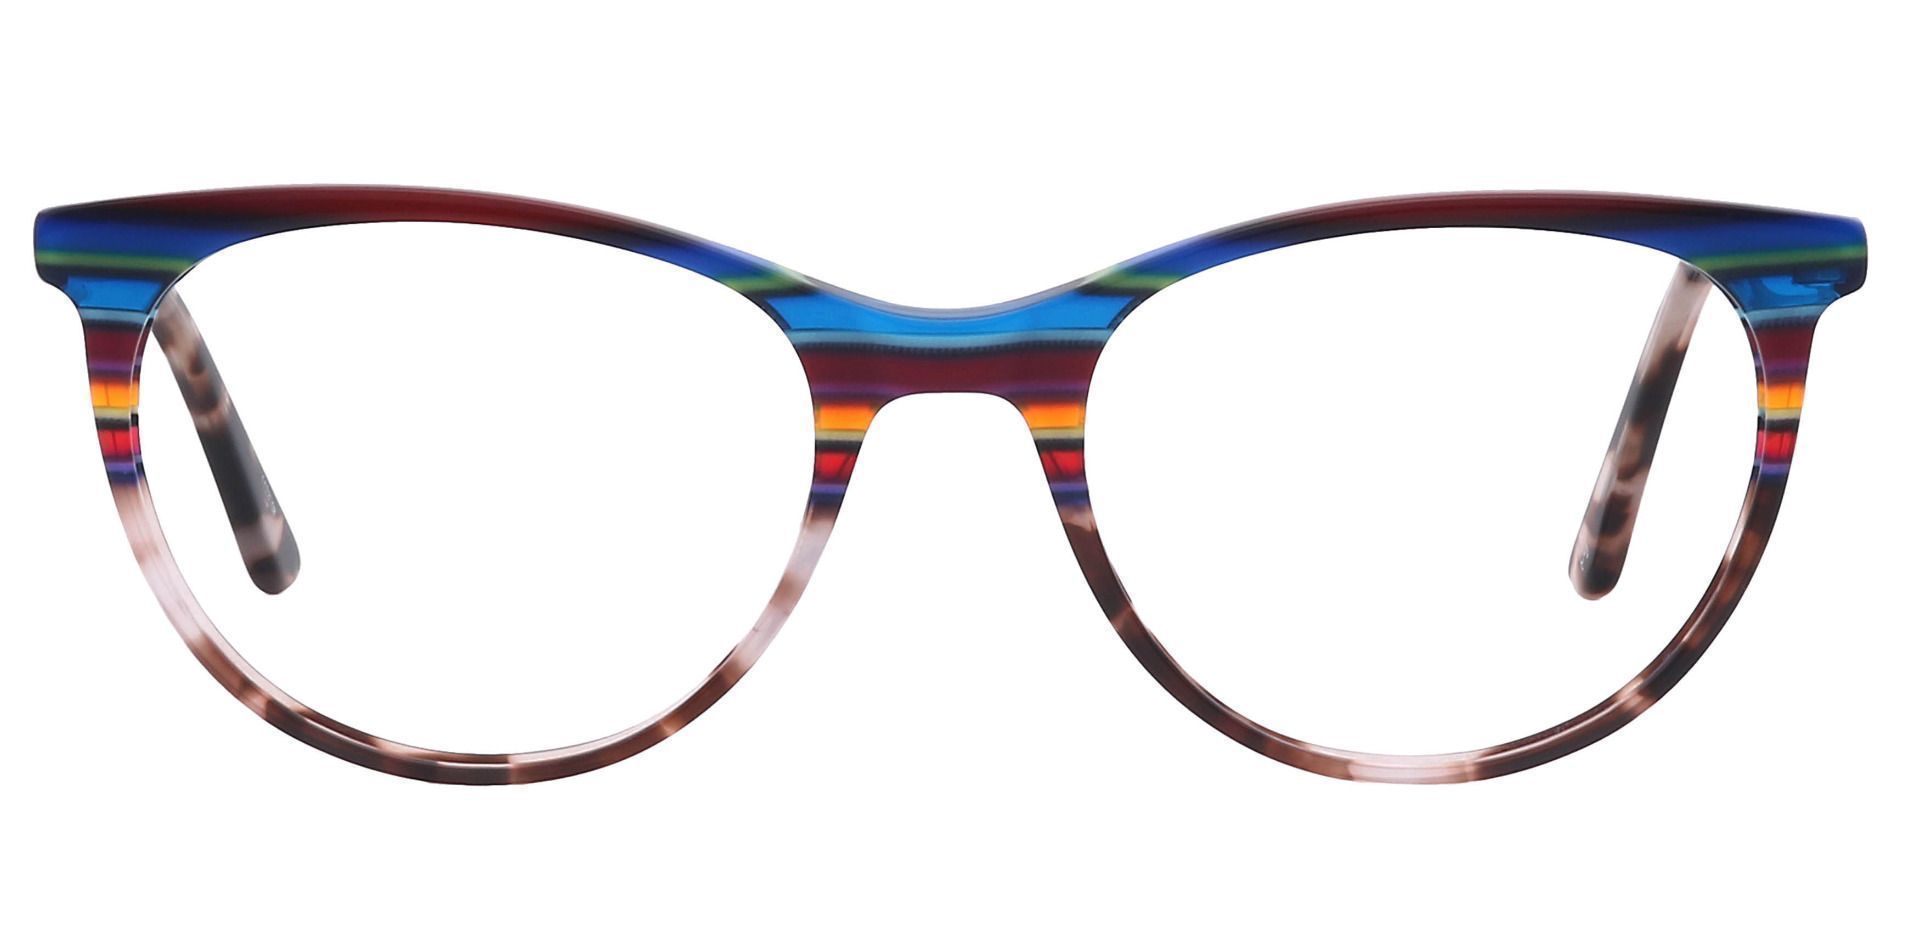 Patagonia Oval Reading Glasses - Multi Colored Stripes